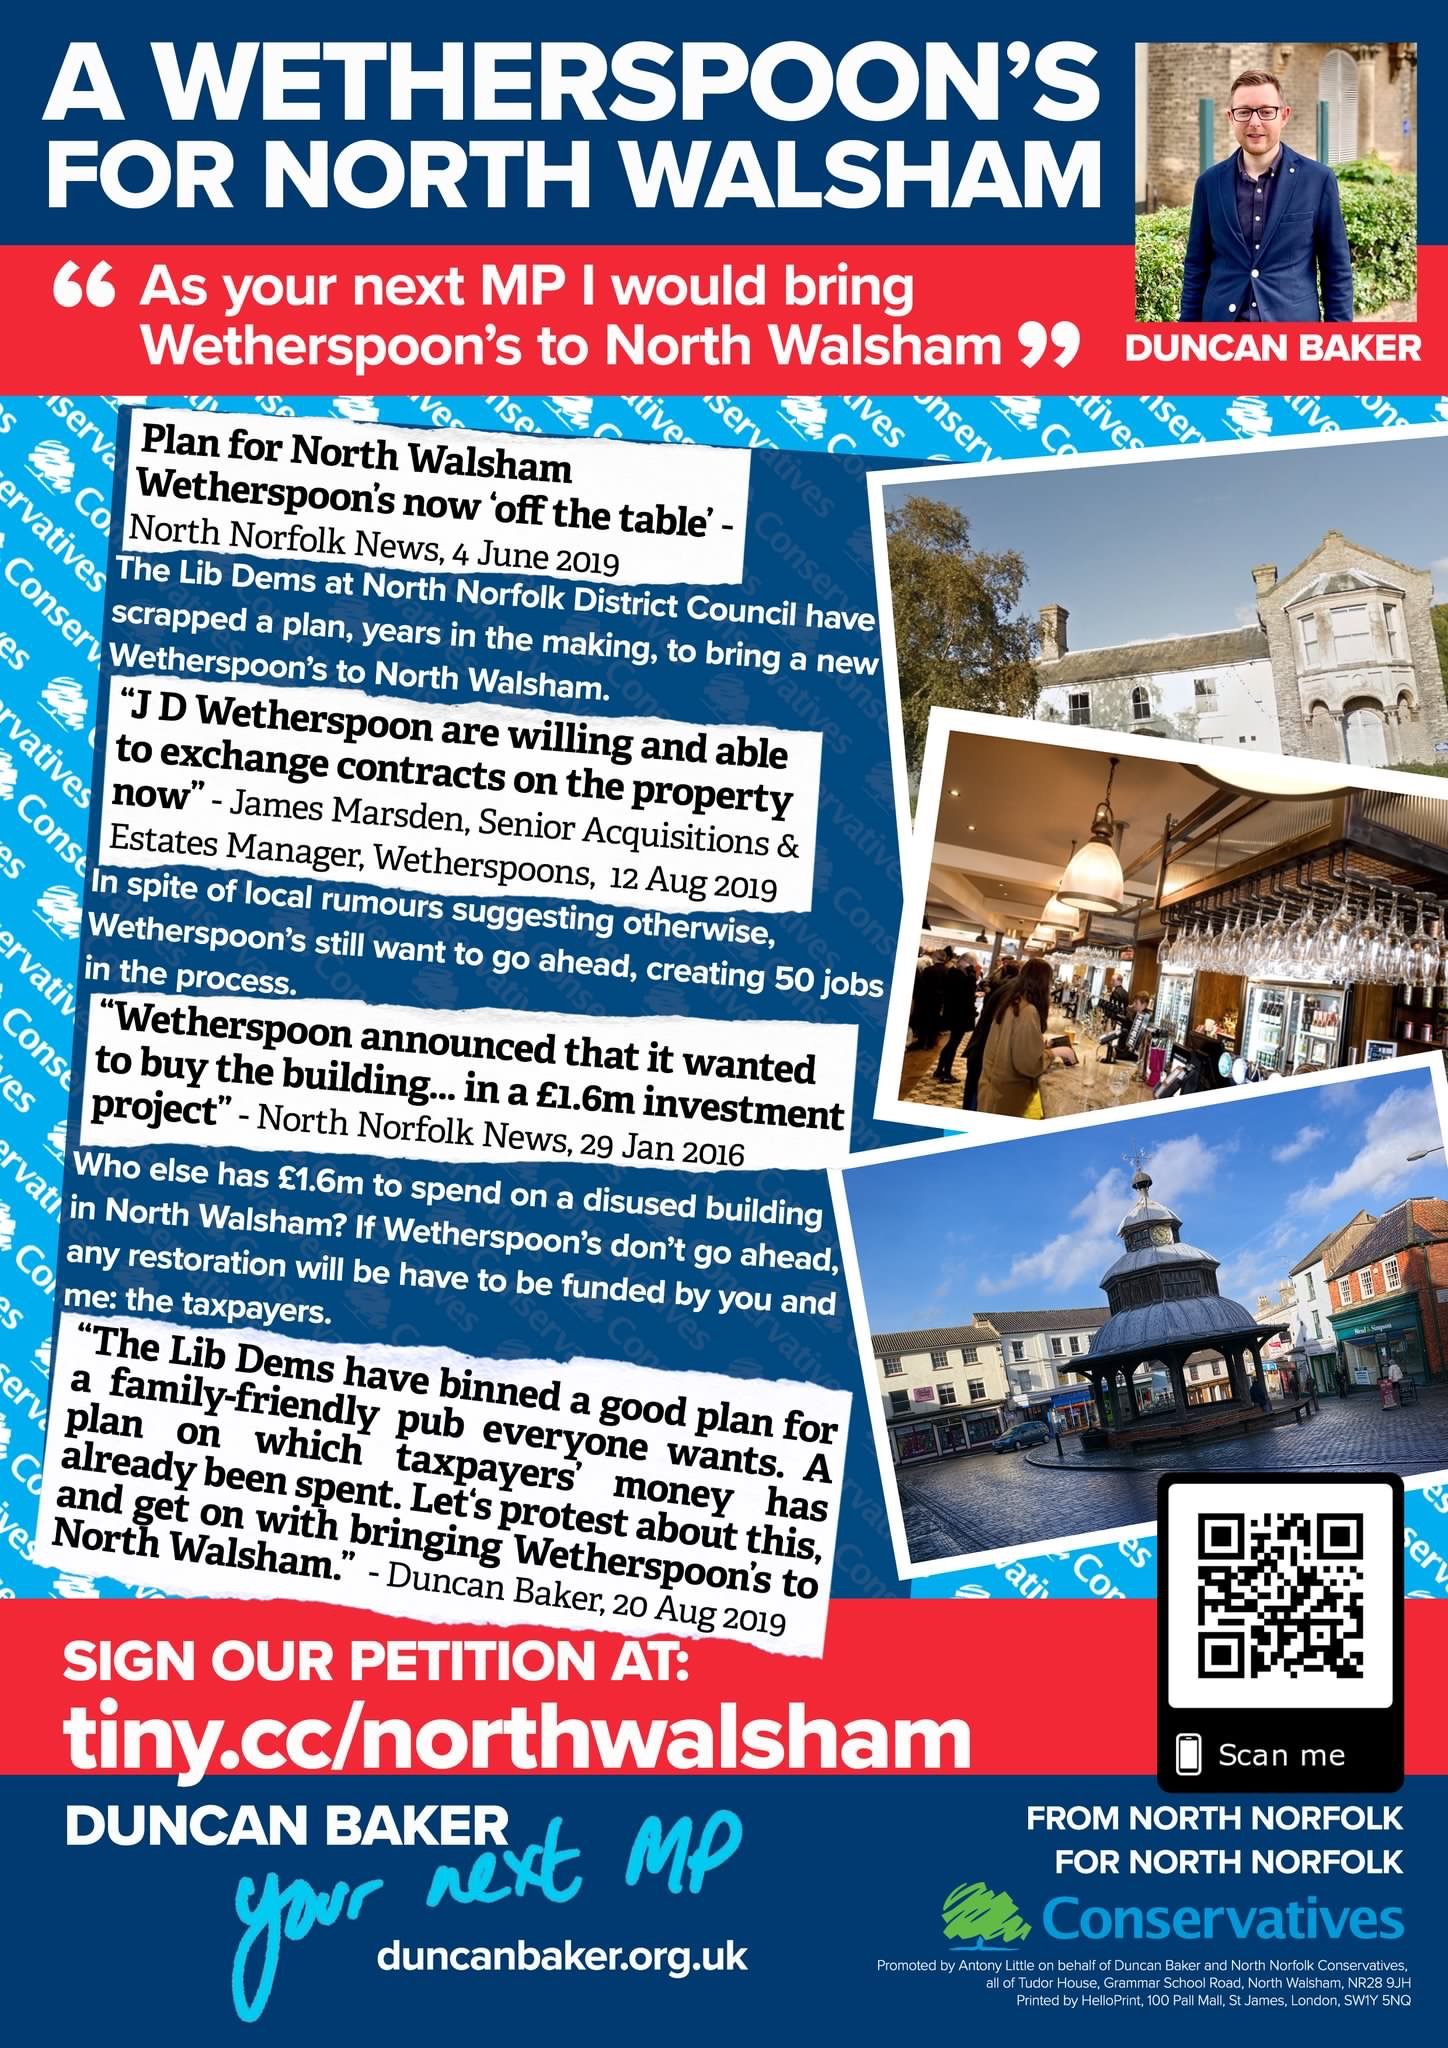 Wetherspoon’s campaign